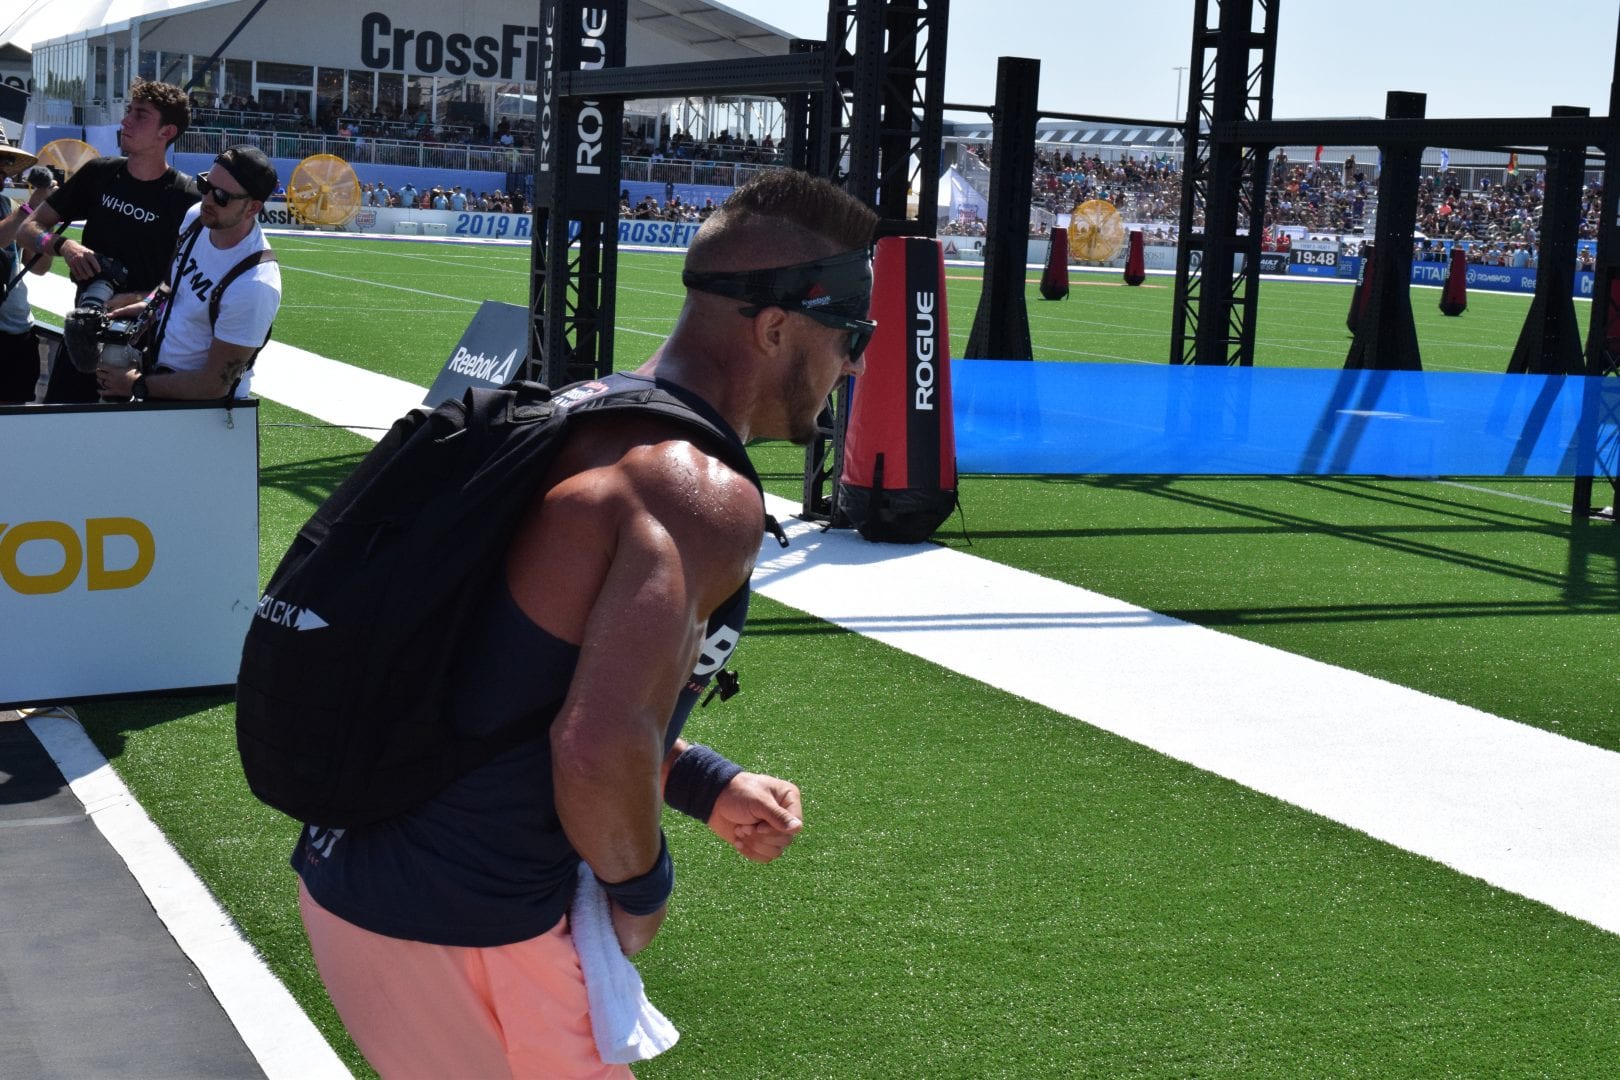 Nick Bloch of the United States completes the Ruck Run event at the 2019 CrossFit Games